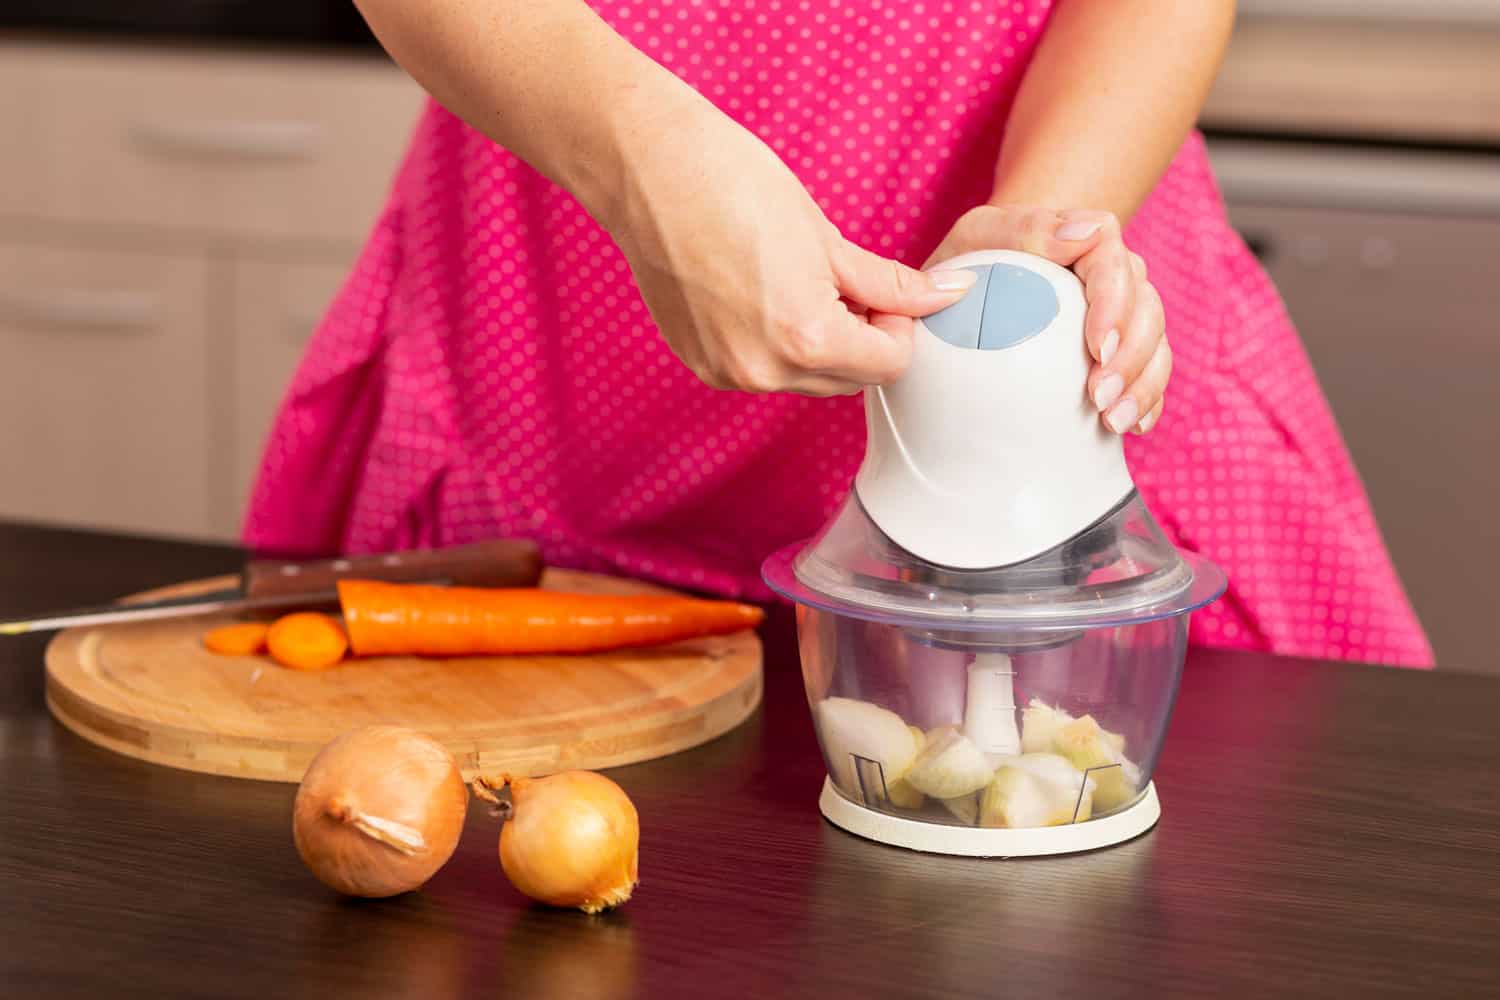 How To Chop Onion In Food Processor